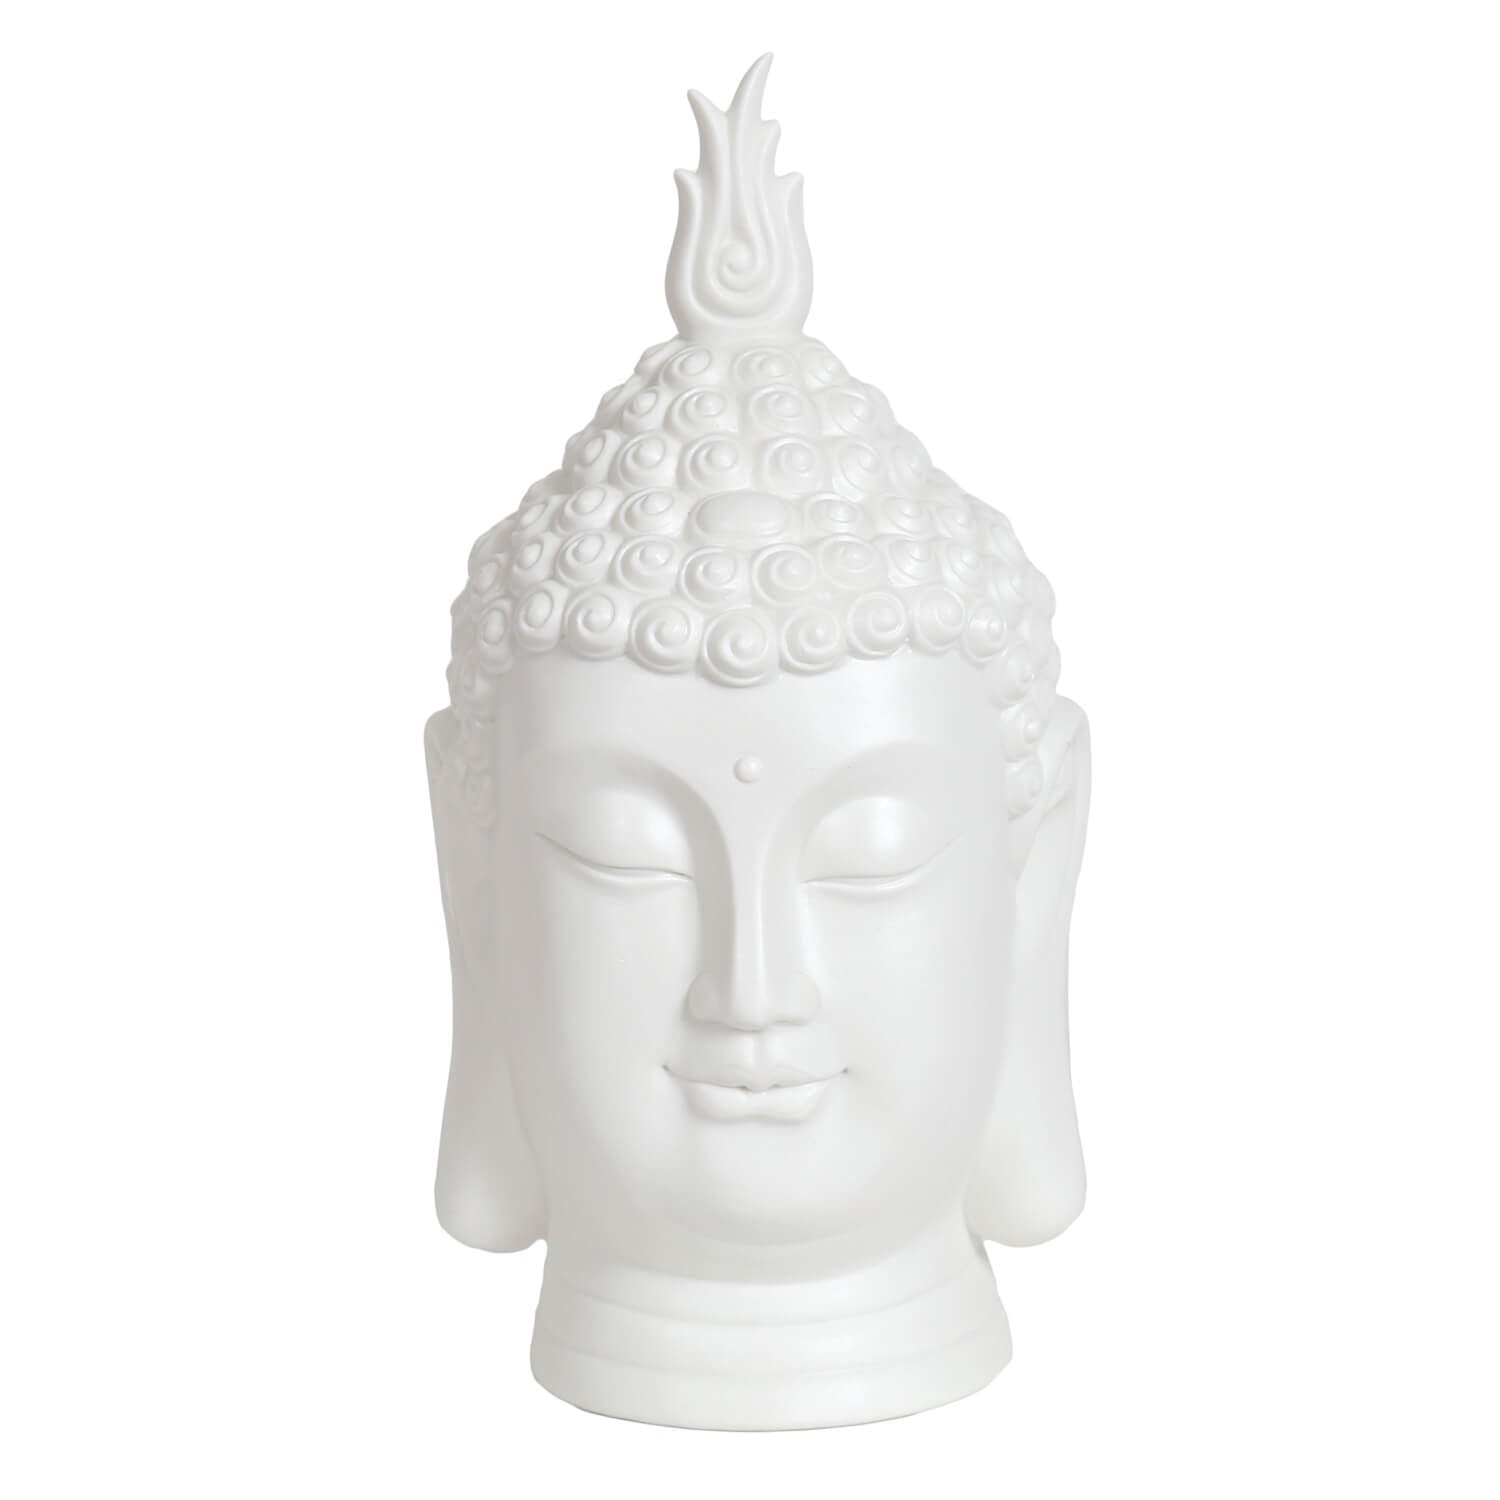 The Home Collection Buddah Head - 27.5cm 1 Shaws Department Stores